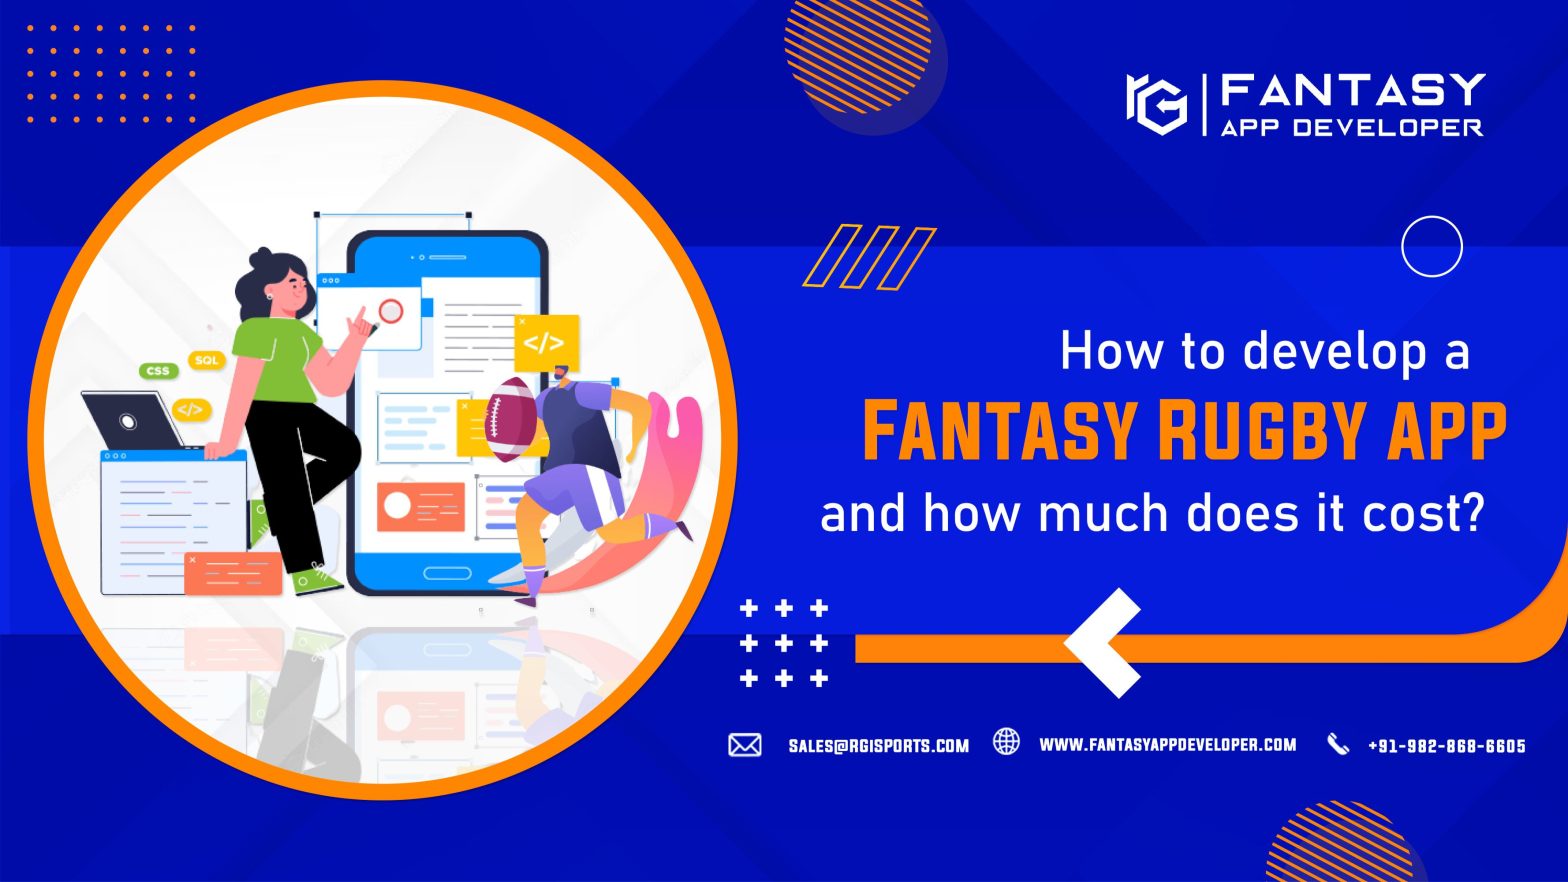 How to develop a Fantasy Rugby app and how much does it cost